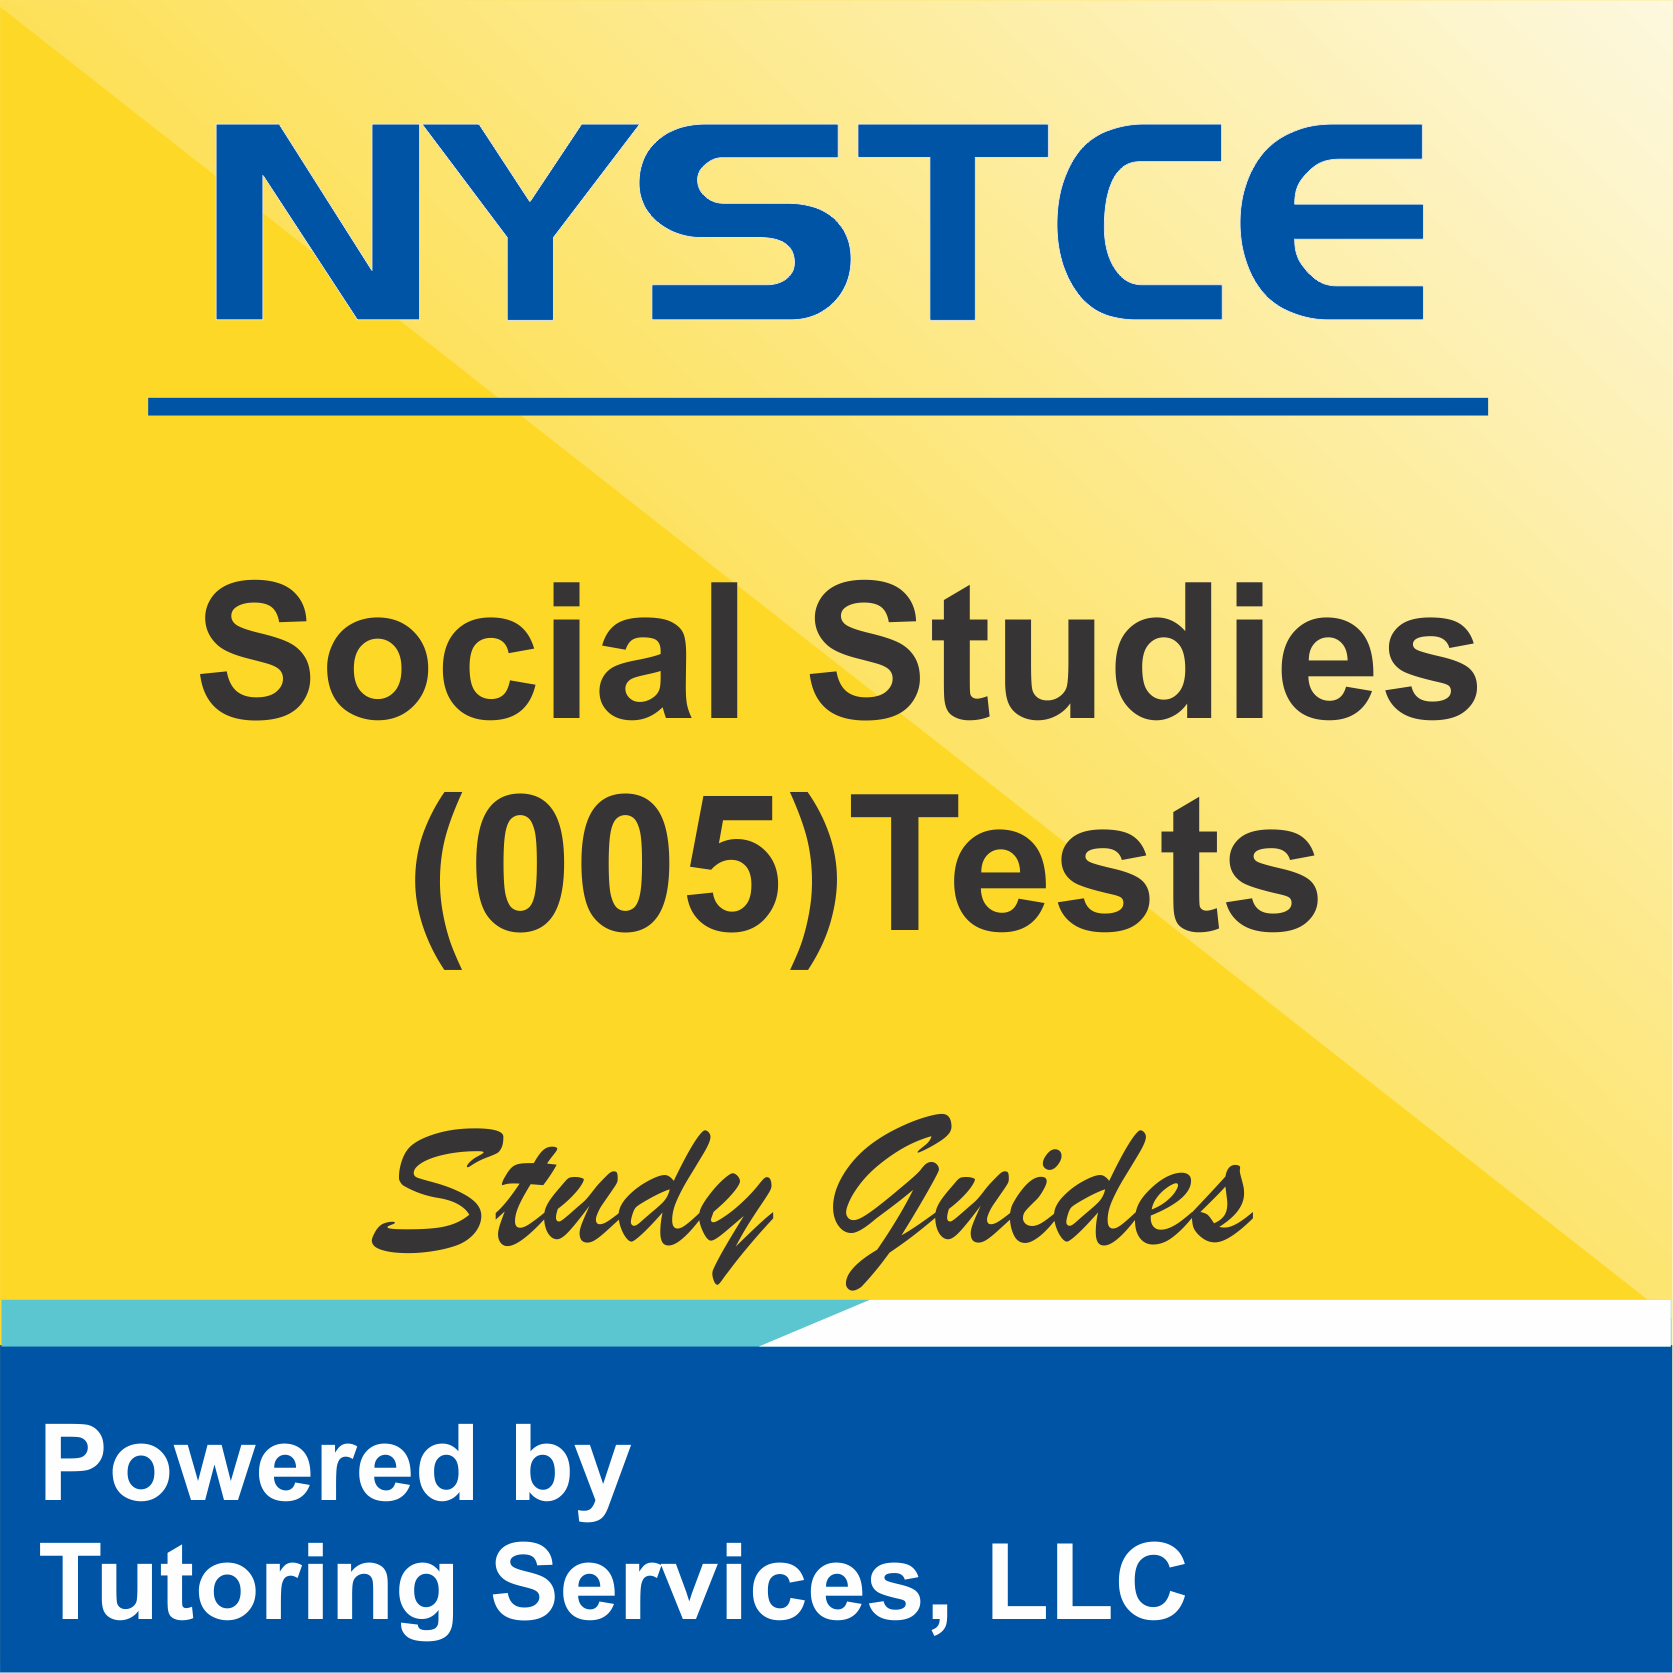 NYSTCE New York State Test and Exam Details for Social Studies 005